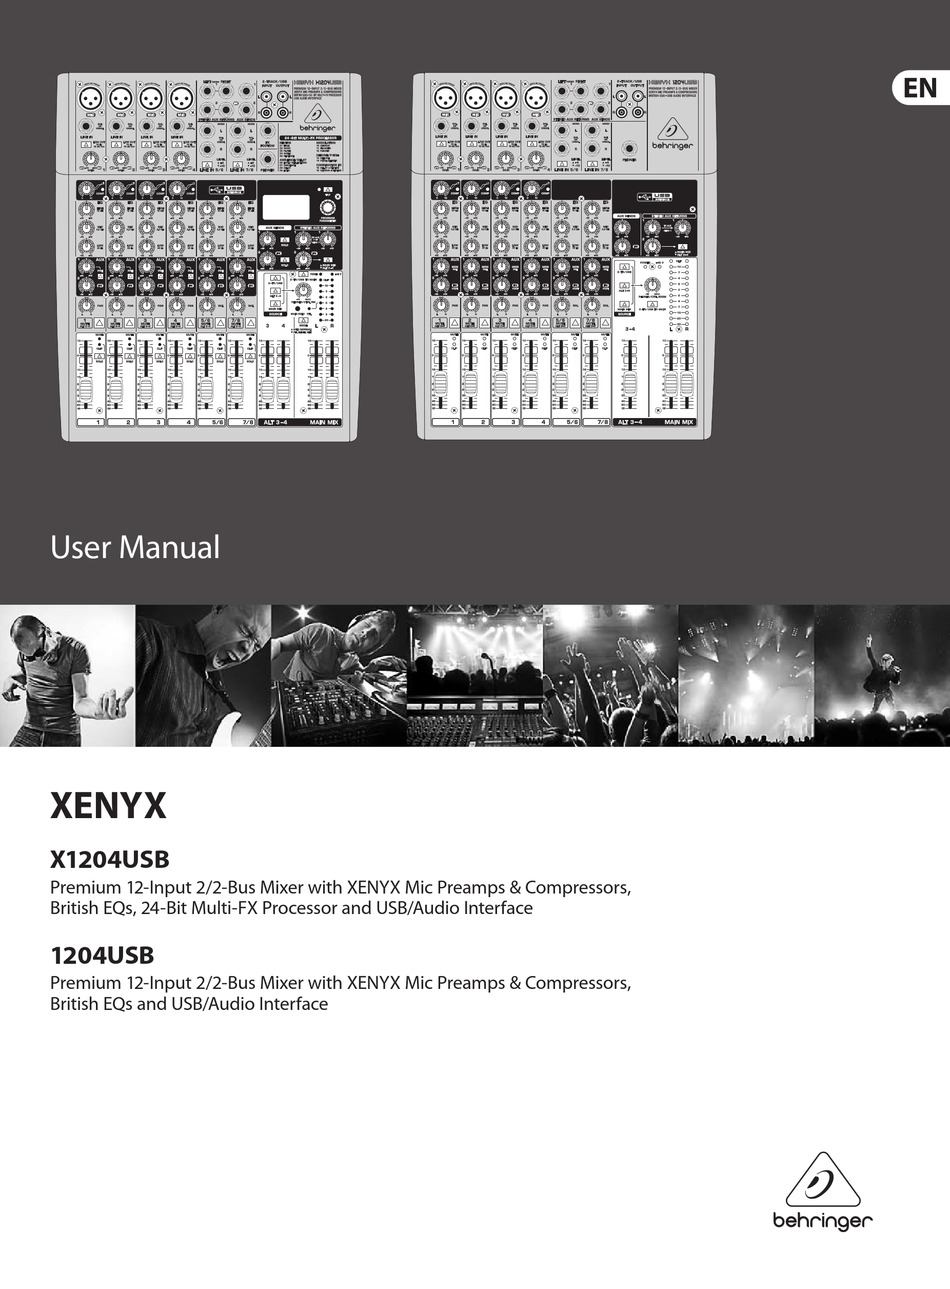 xenyx x1204usb connect to pc